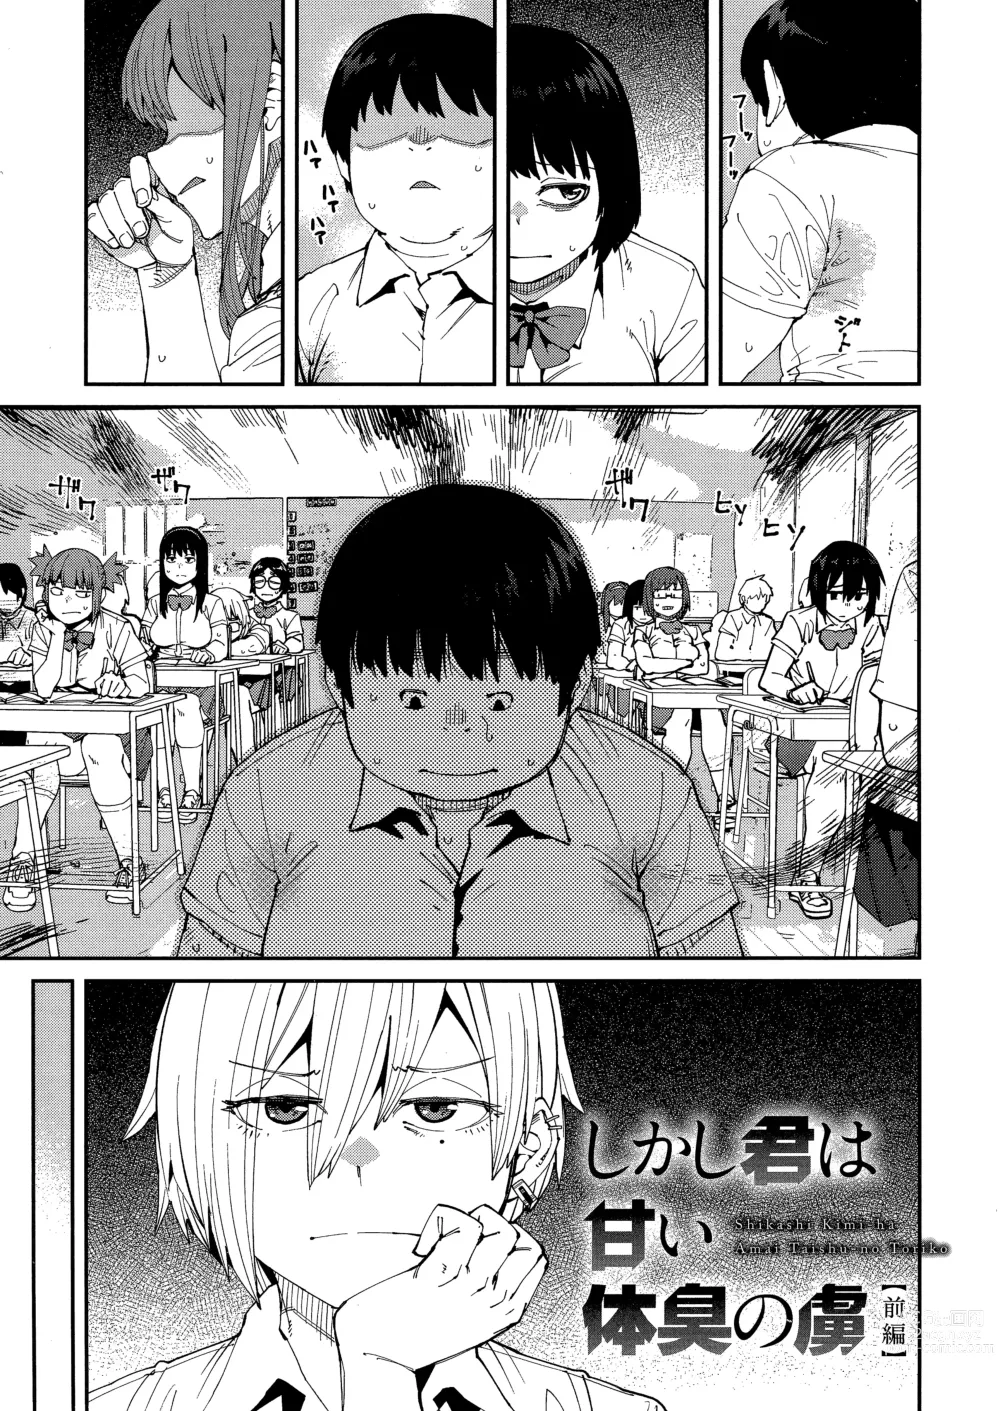 Page 5 of manga Sweet and Hot